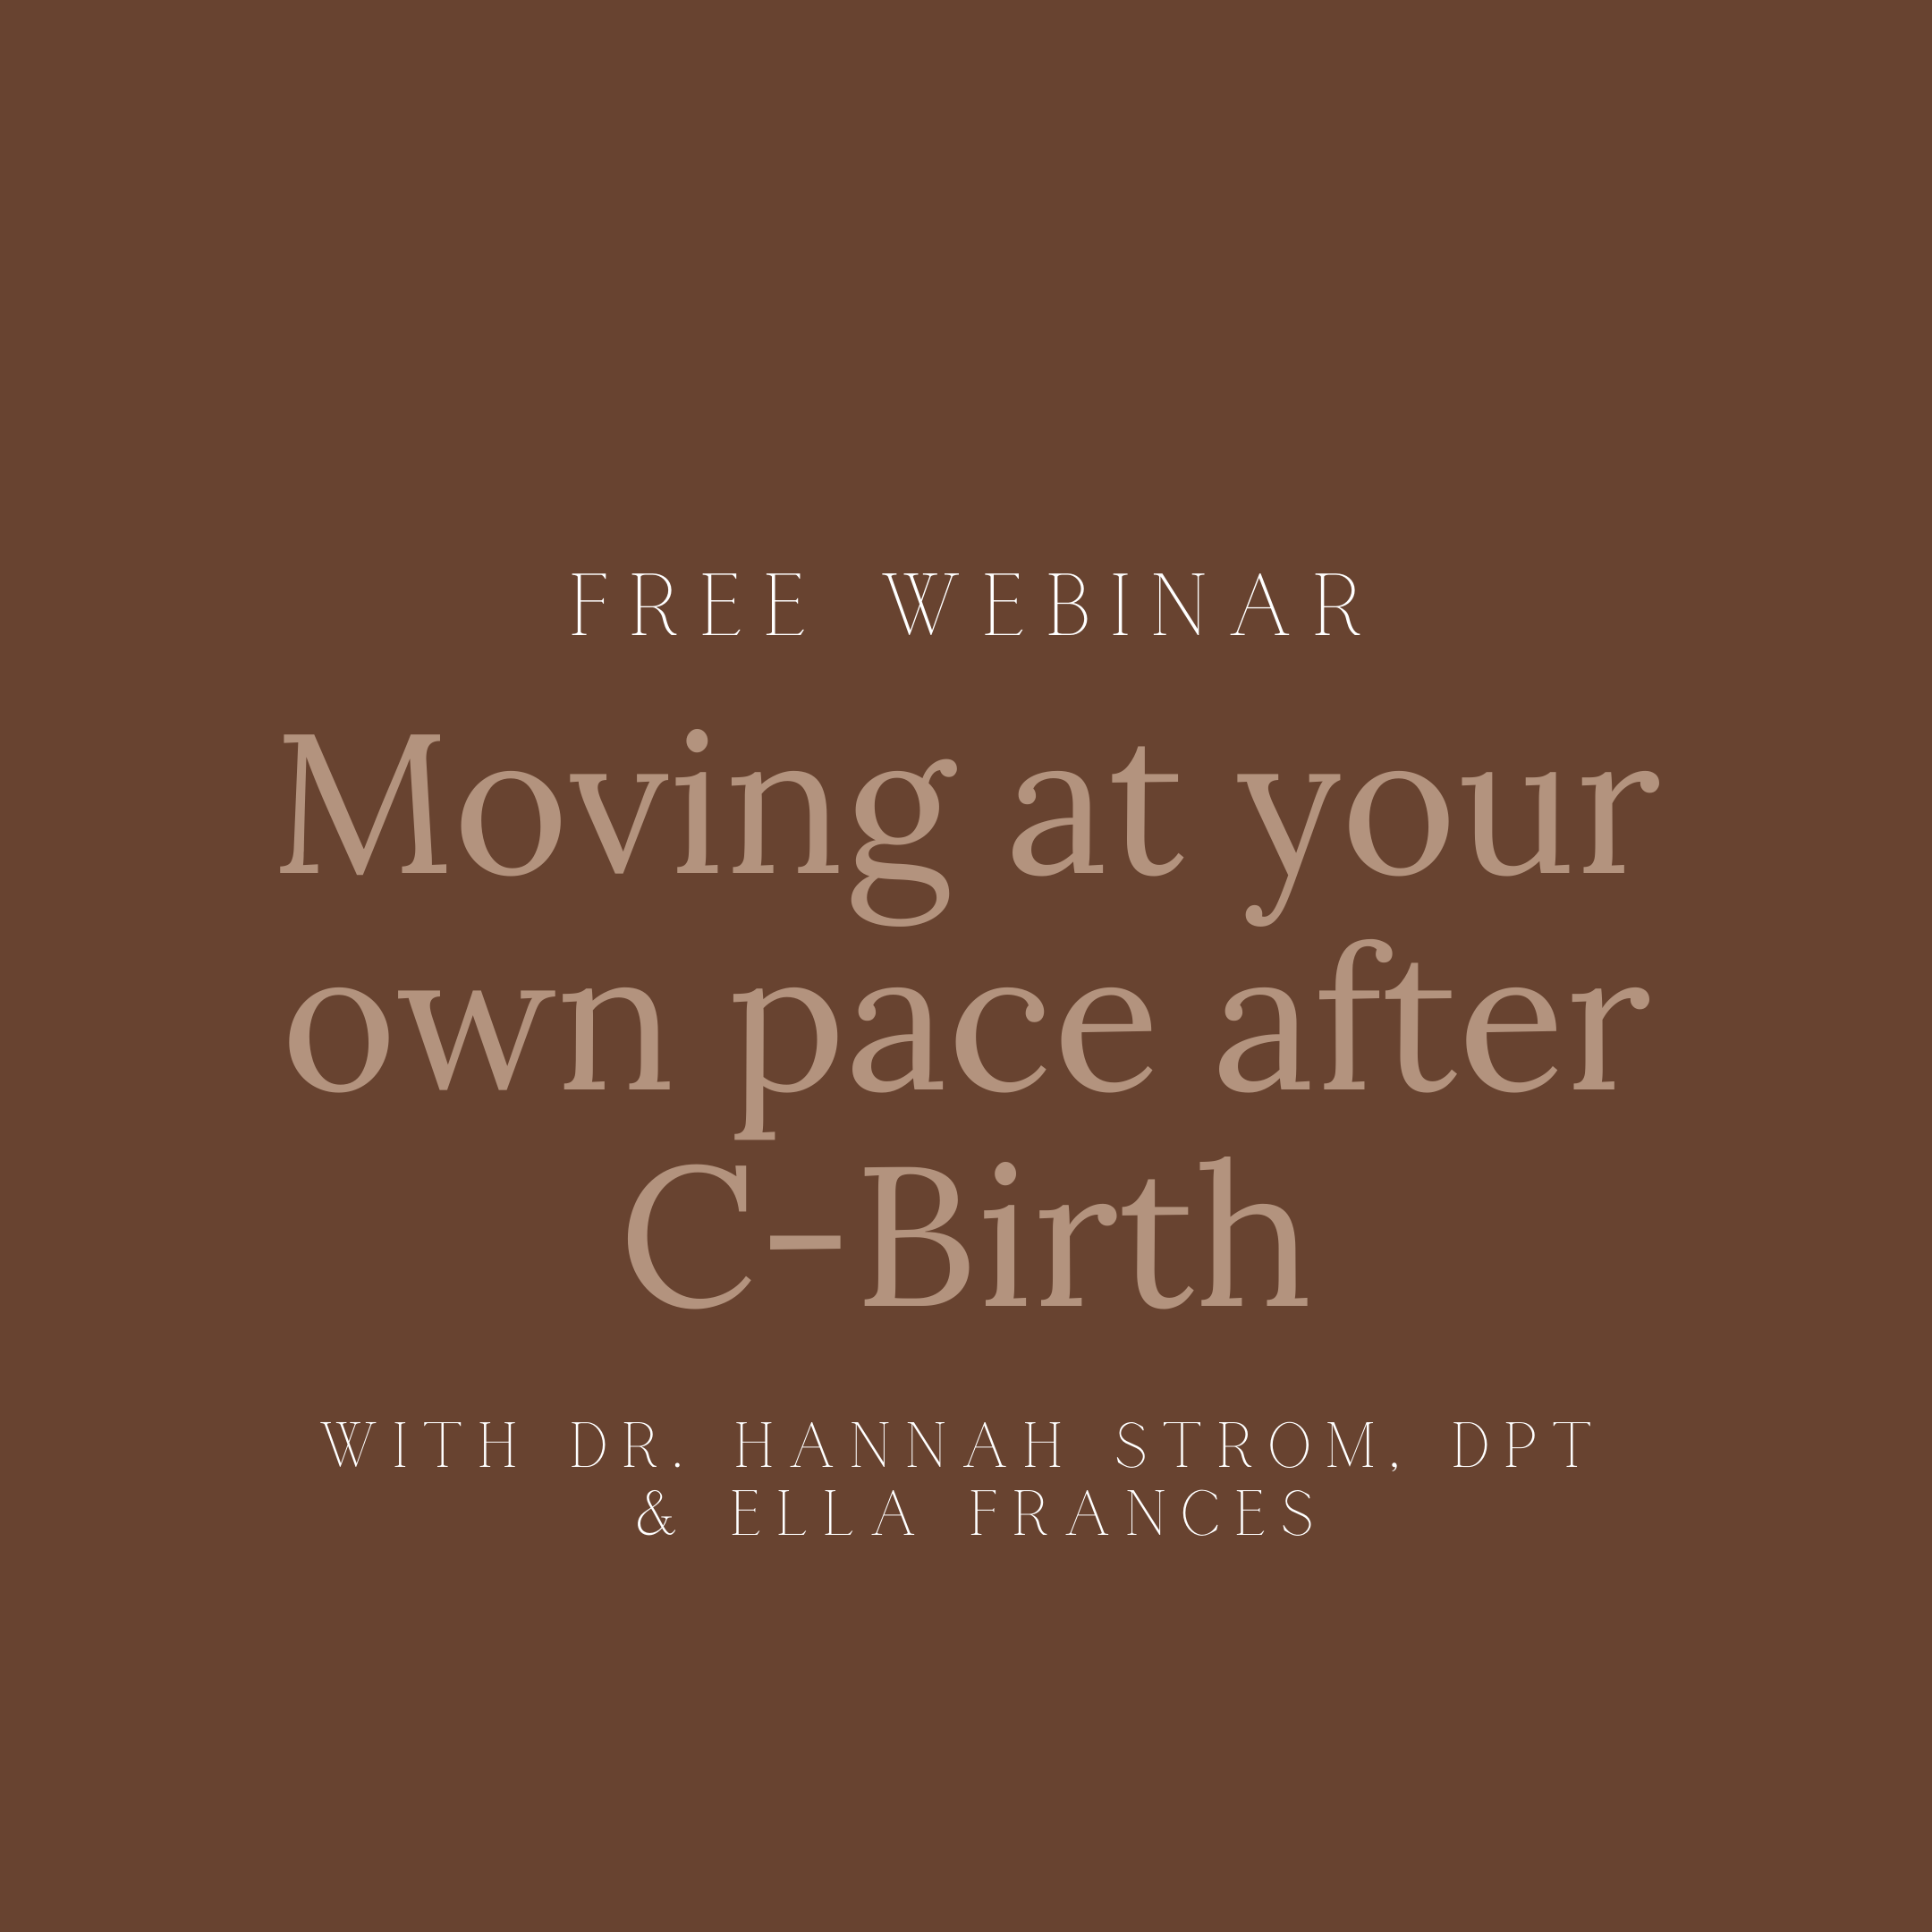 Free Webinar Moving at your own pace after c-birth